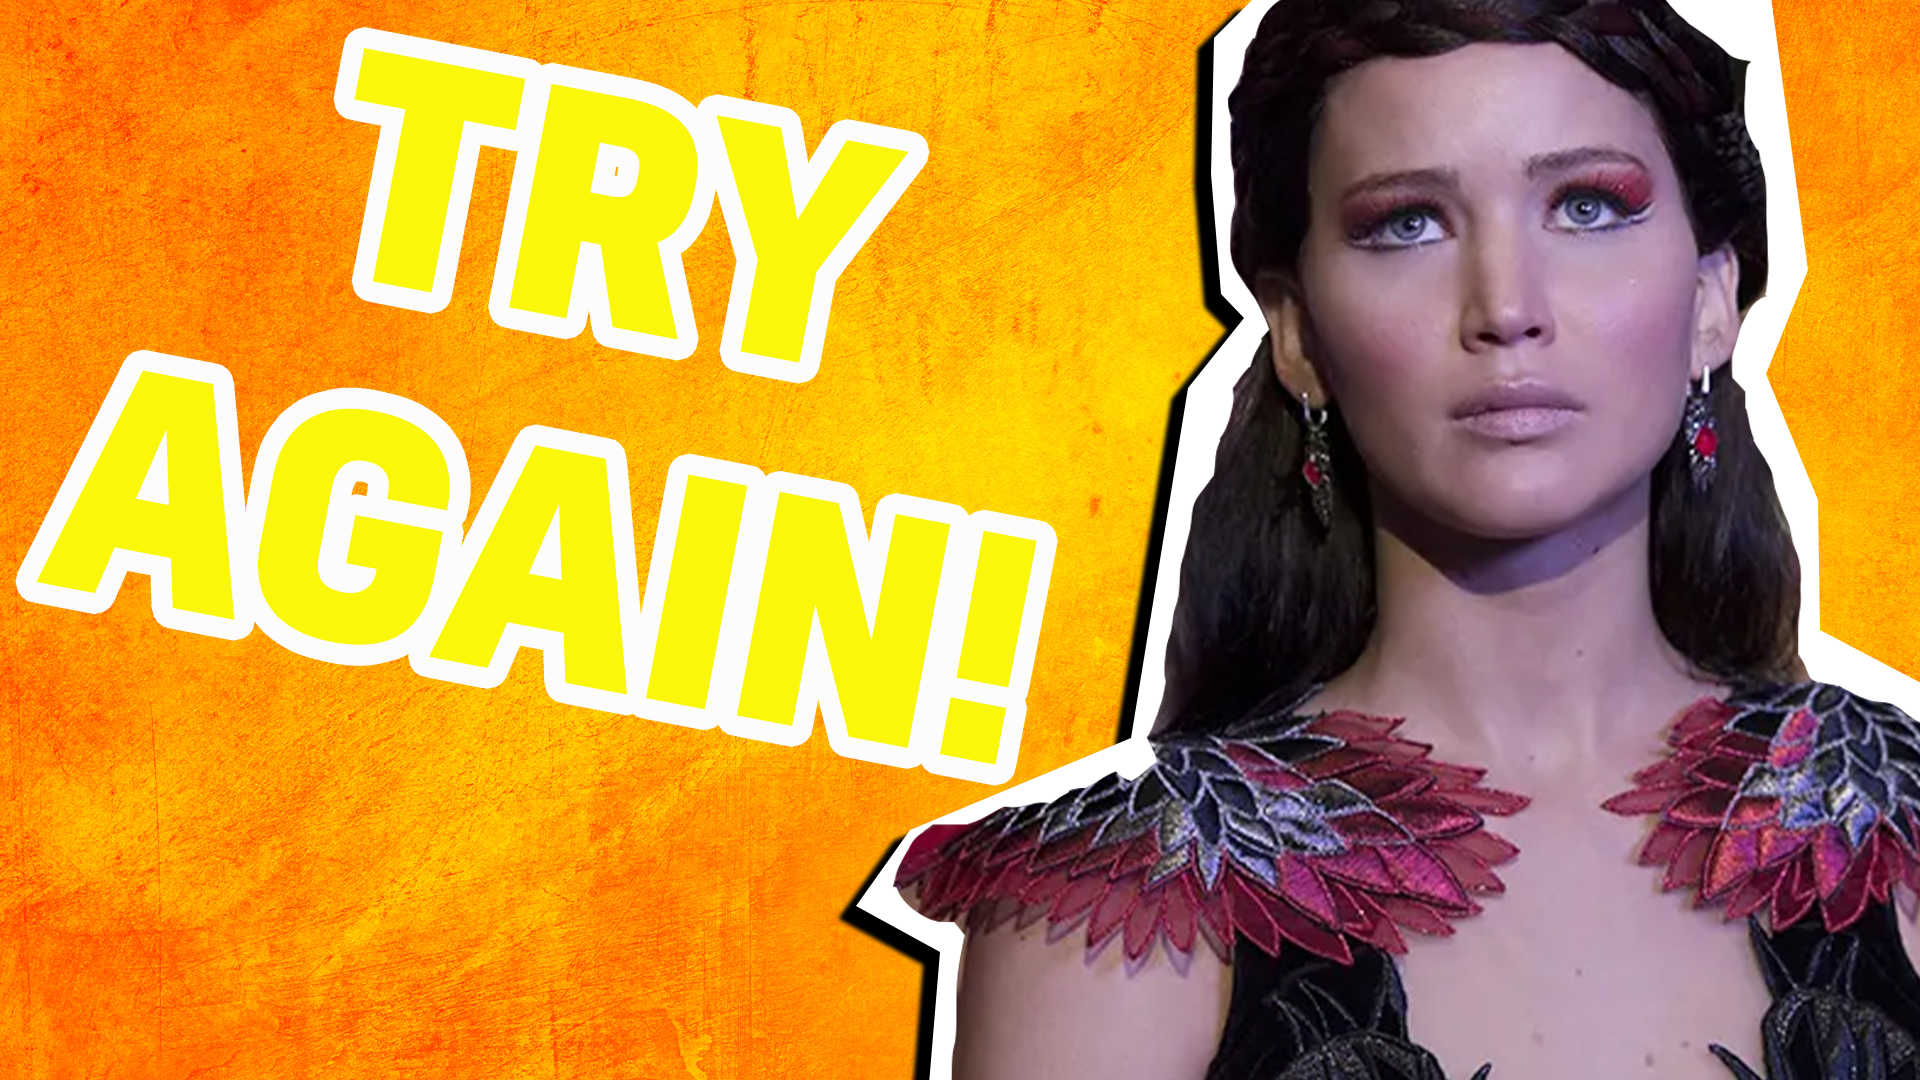 Try again! You know a bit but not enough to ace this Catching Fire quiz! You'll need to be smarter than that to survive the Hunger Games!